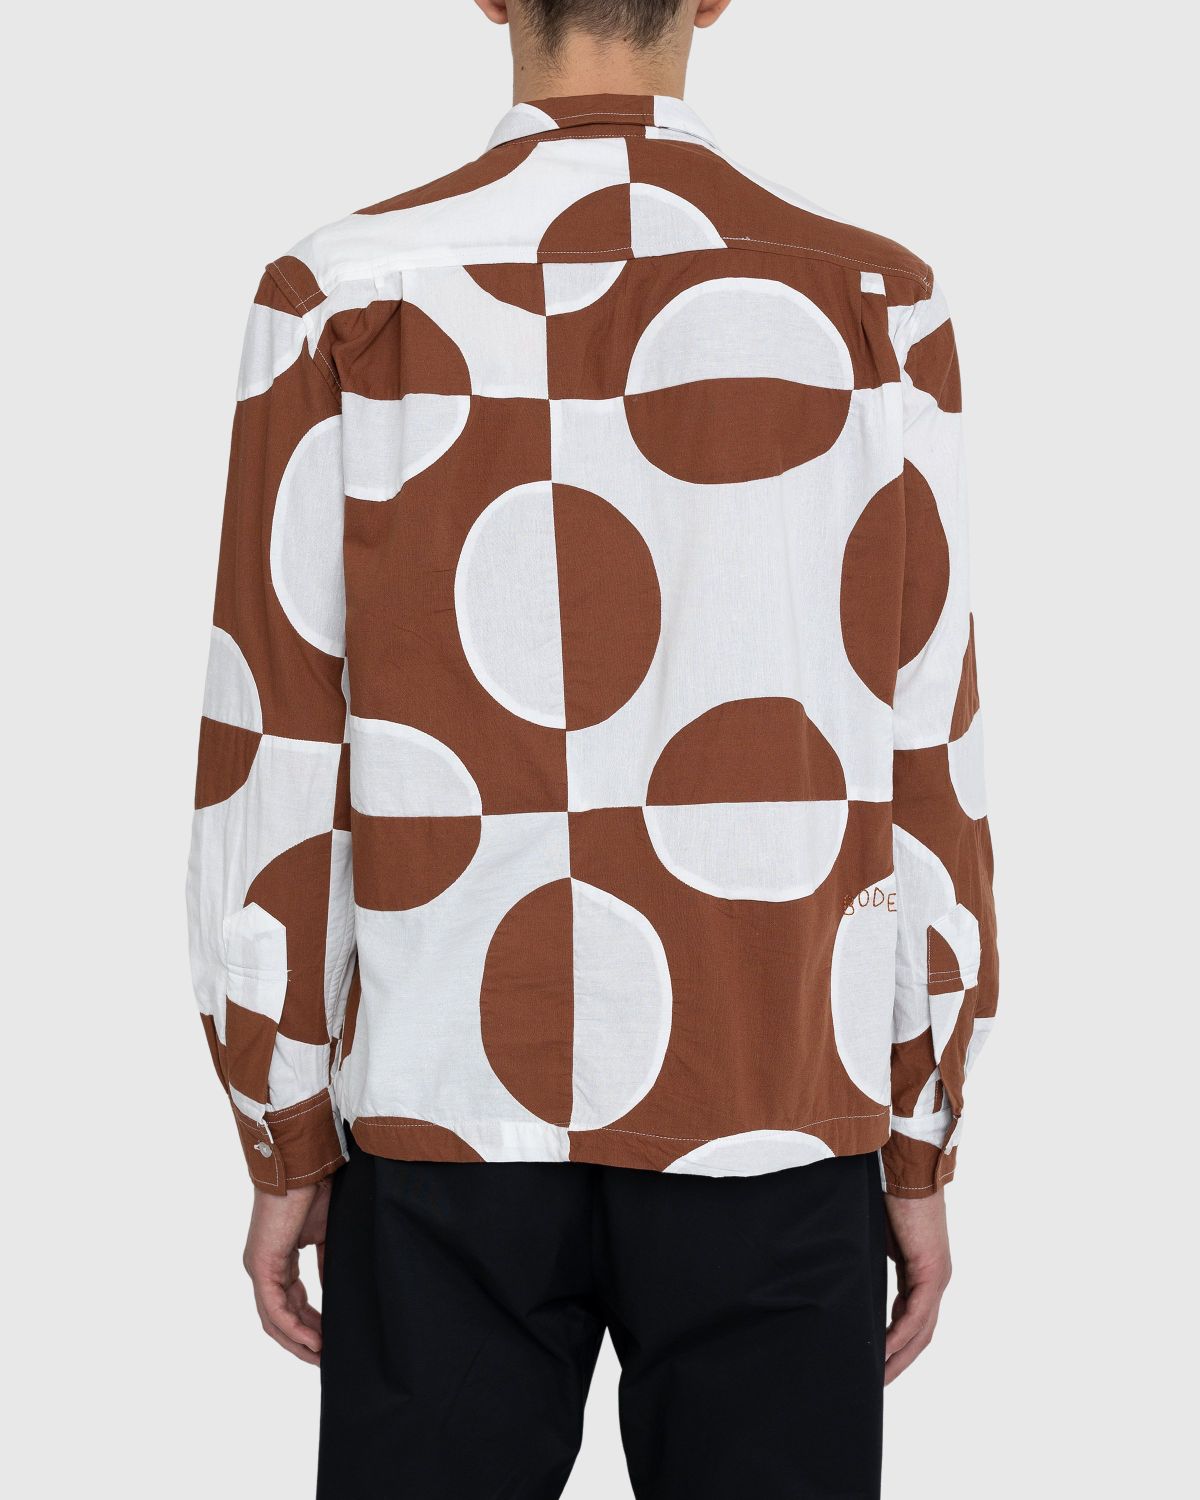 Bode – Duo Oval Patchwork Long-Sleeve Shirt Brown - Longsleeve Shirts - Multi - Image 4